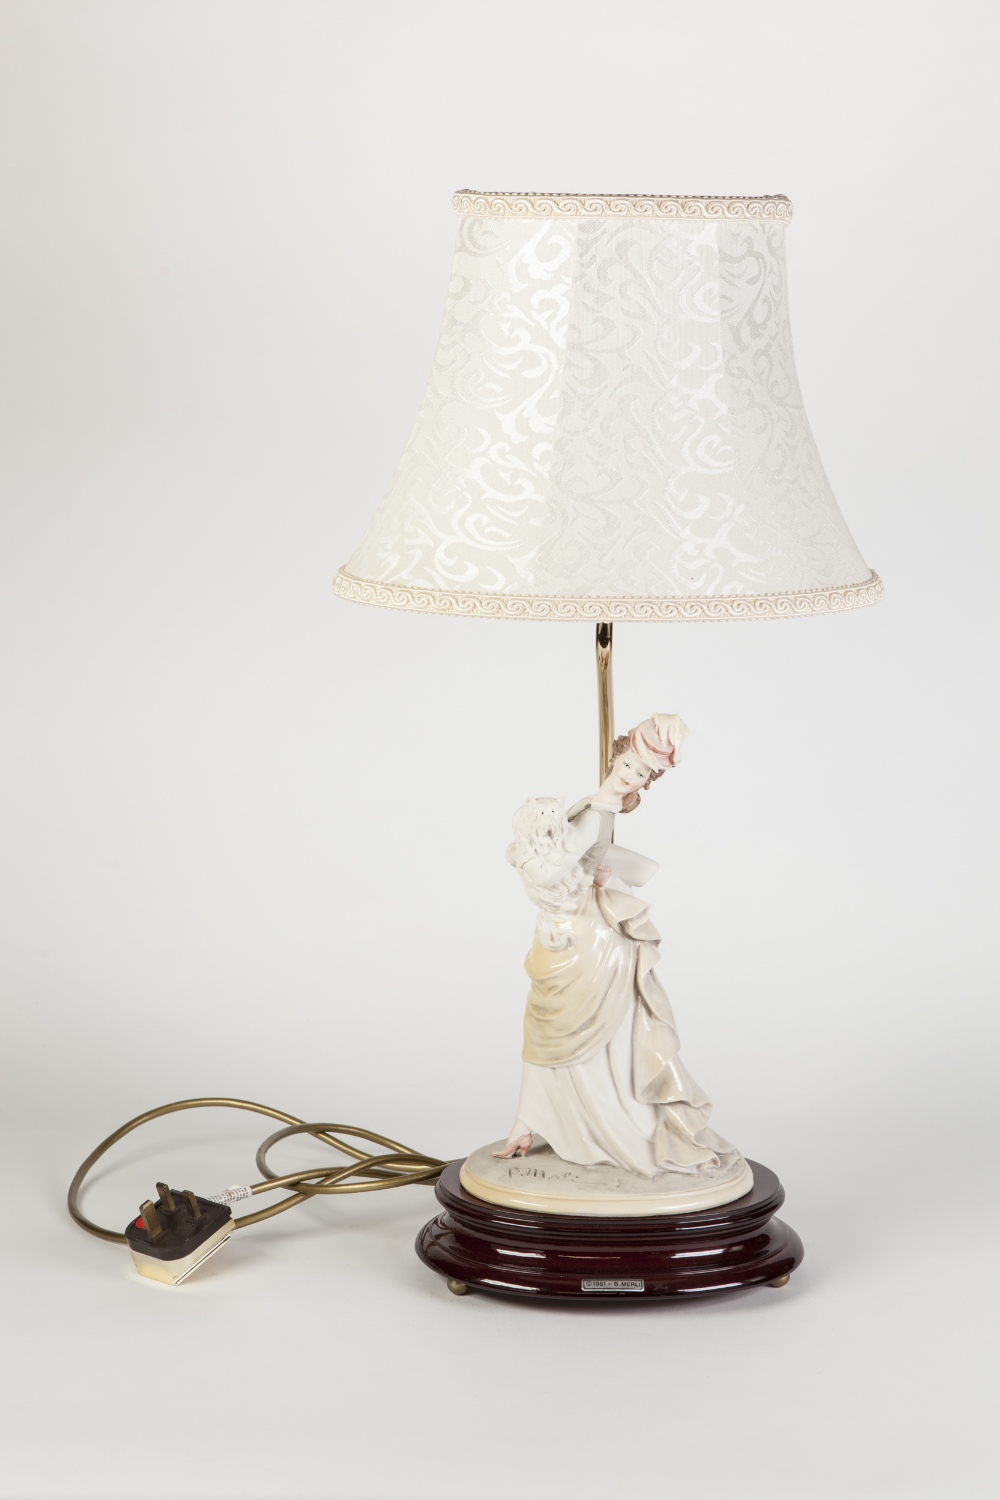 TWO MODERN CAPODIMONTE PARIAN PORCELAIN FIGURAL TABLE LAMPS, one tinted and modelled as an elegant - Image 2 of 2